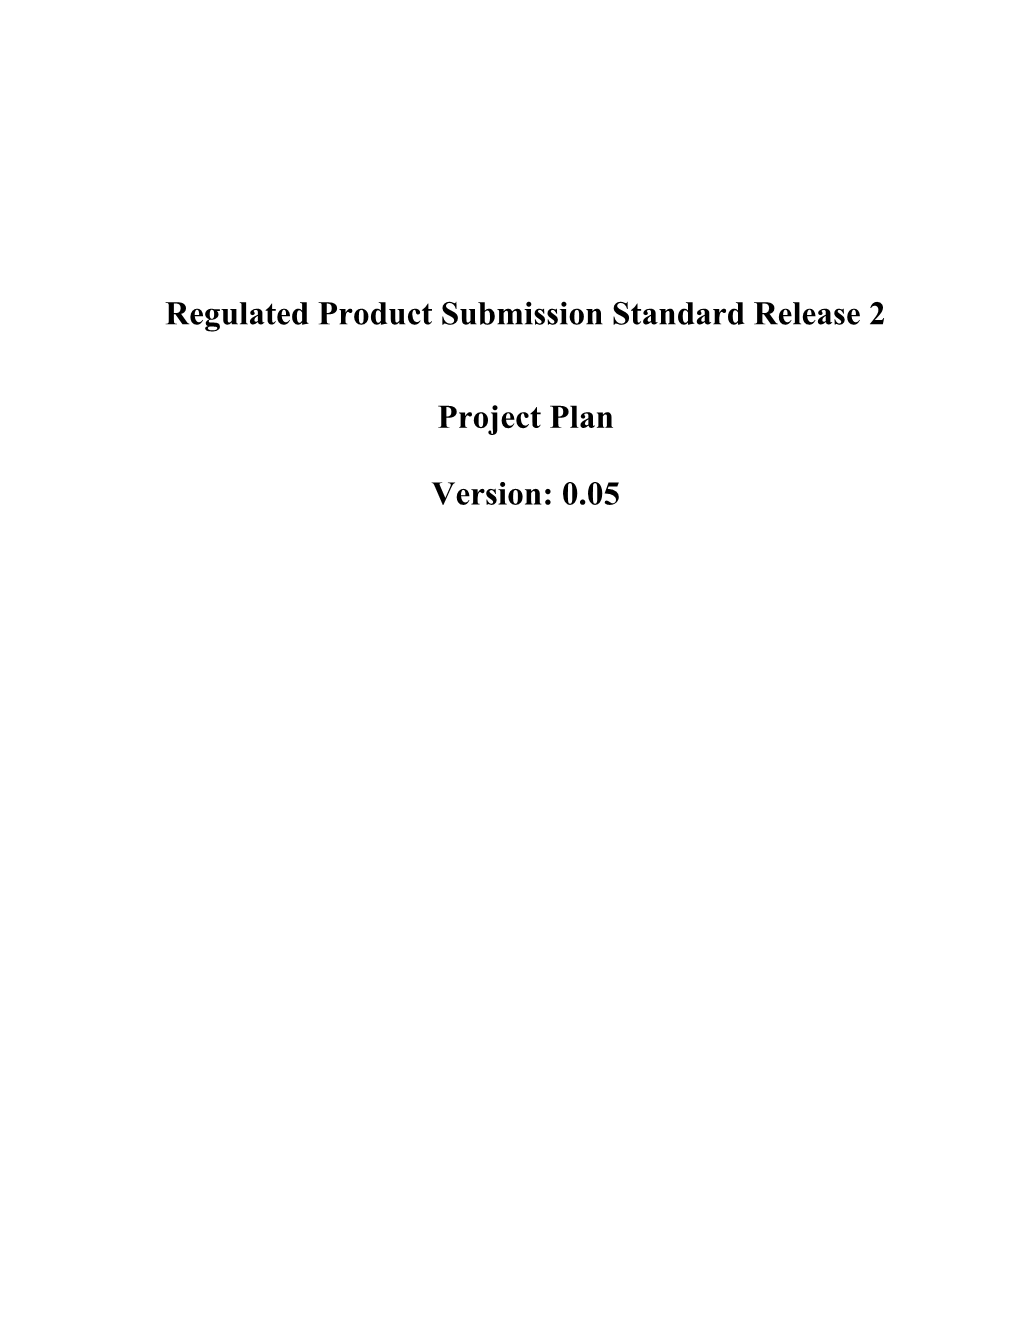 Regulated Product Submission Standard Release 2